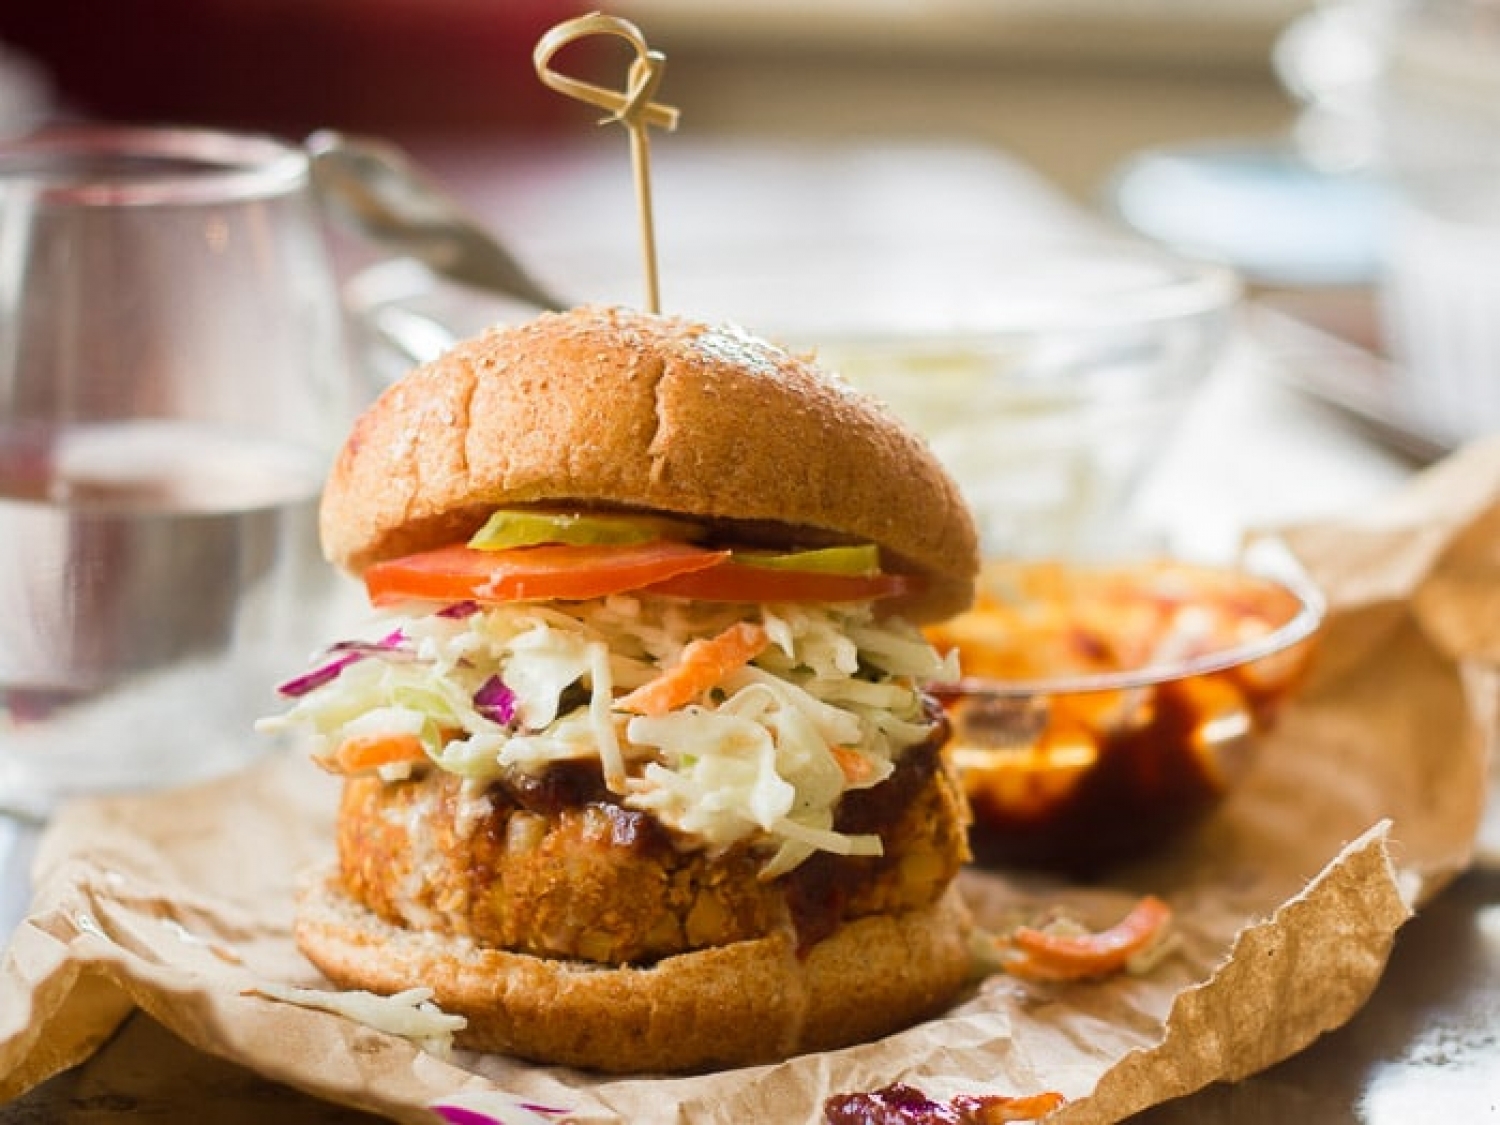 <p>Replace your usual BBQ pulled pork or chicken with crispy, satisfying chickpea patties. They get their crunch from rolled oats, and when combined with homemade barbecue sauce and vegan-friendly coleslaw, they'll be just as tasty as anything you can make with meat. <a href="https://www.connoisseurusveg.com/barbecue-chickpea-burgers/" rel="noopener">Get the recipe here.</a></p>